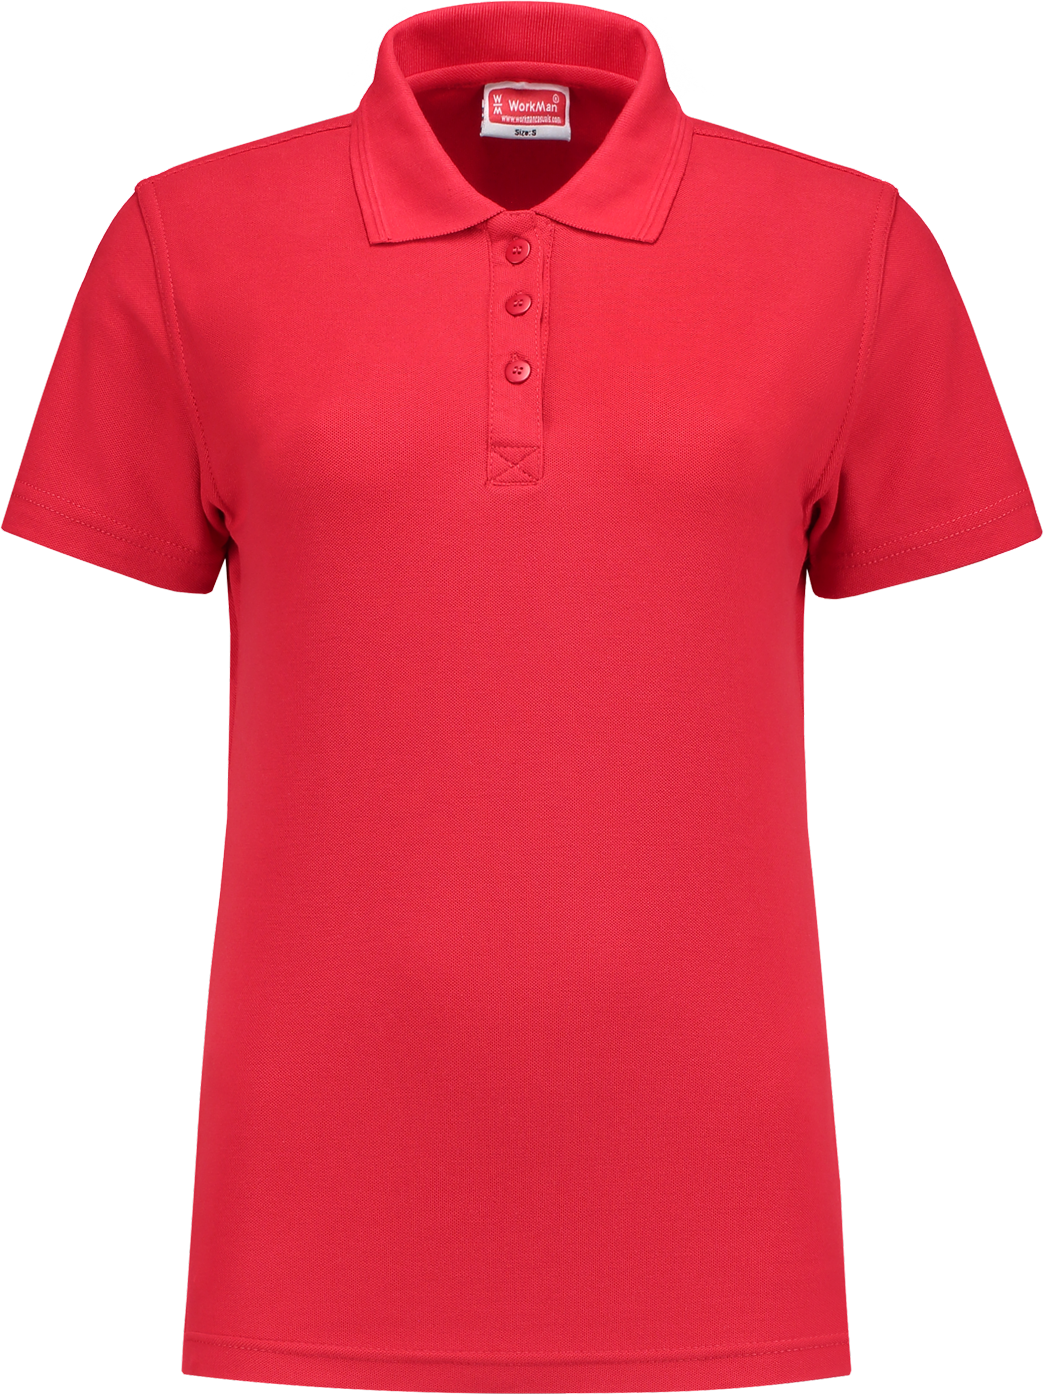 10.6.8103.10 81031 Poloshirt Outfitters Ladies Rood XS